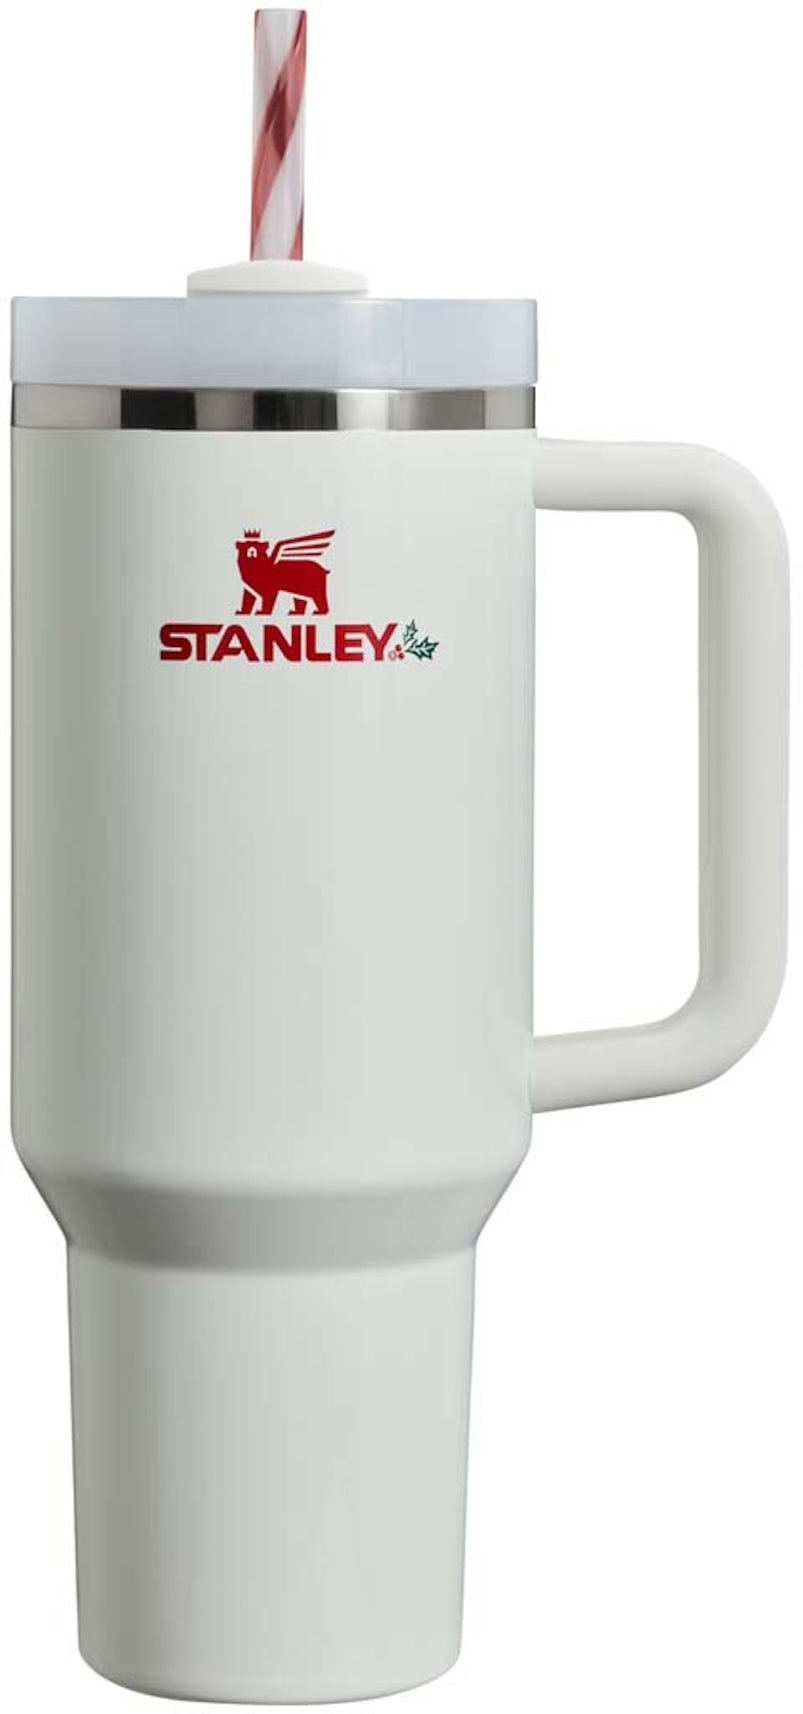 Stanley Flowstate Quencher 30oz Tumbler Sizzling Pink in Stainless Steel -  US